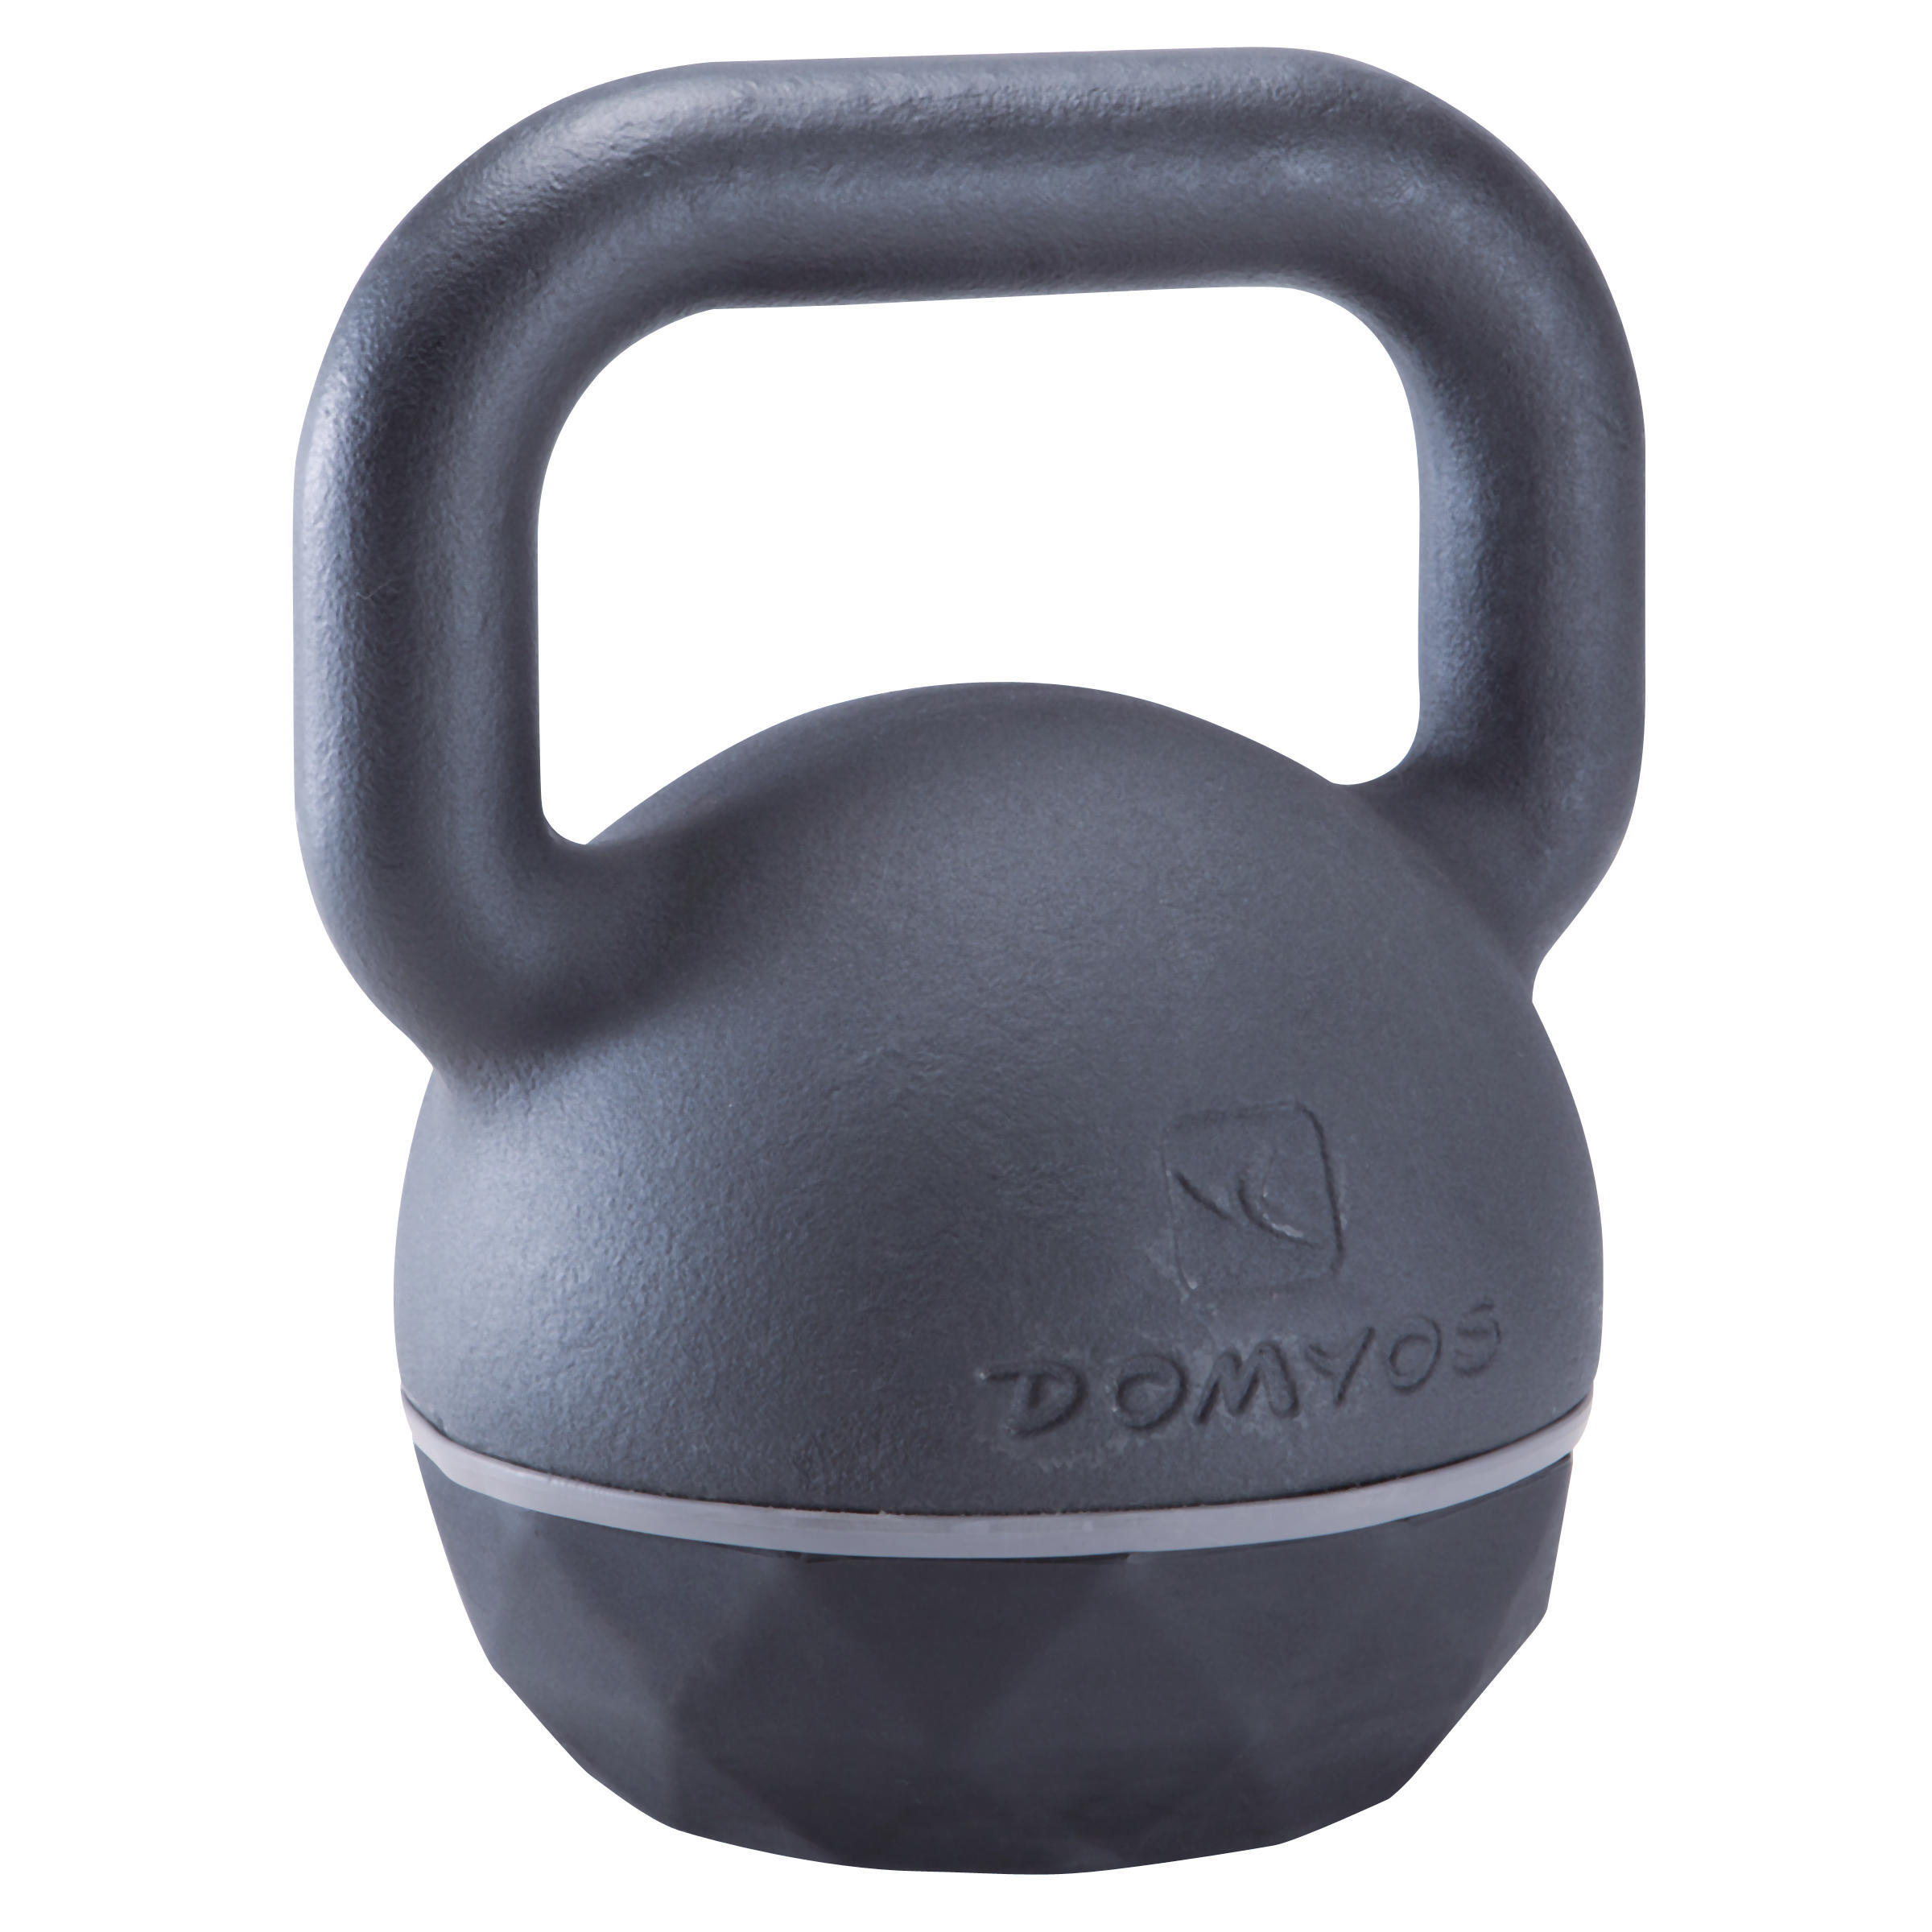 Cast Iron Kettlebell with Rubber Base - 24 kg 2/9